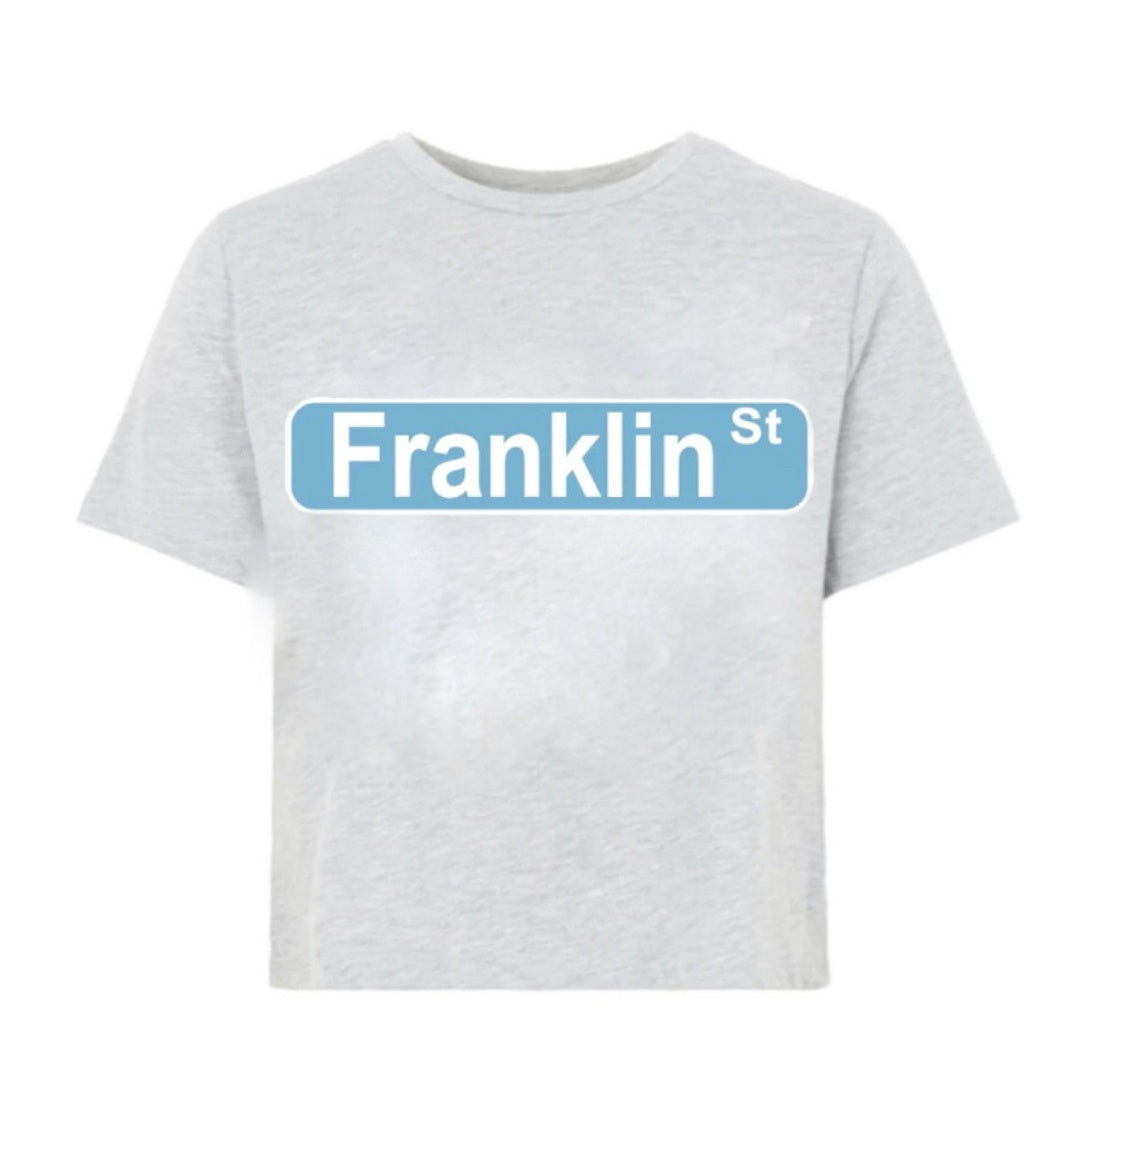 Franklin Street Cropped T-Shirt in Light Grey from SHB